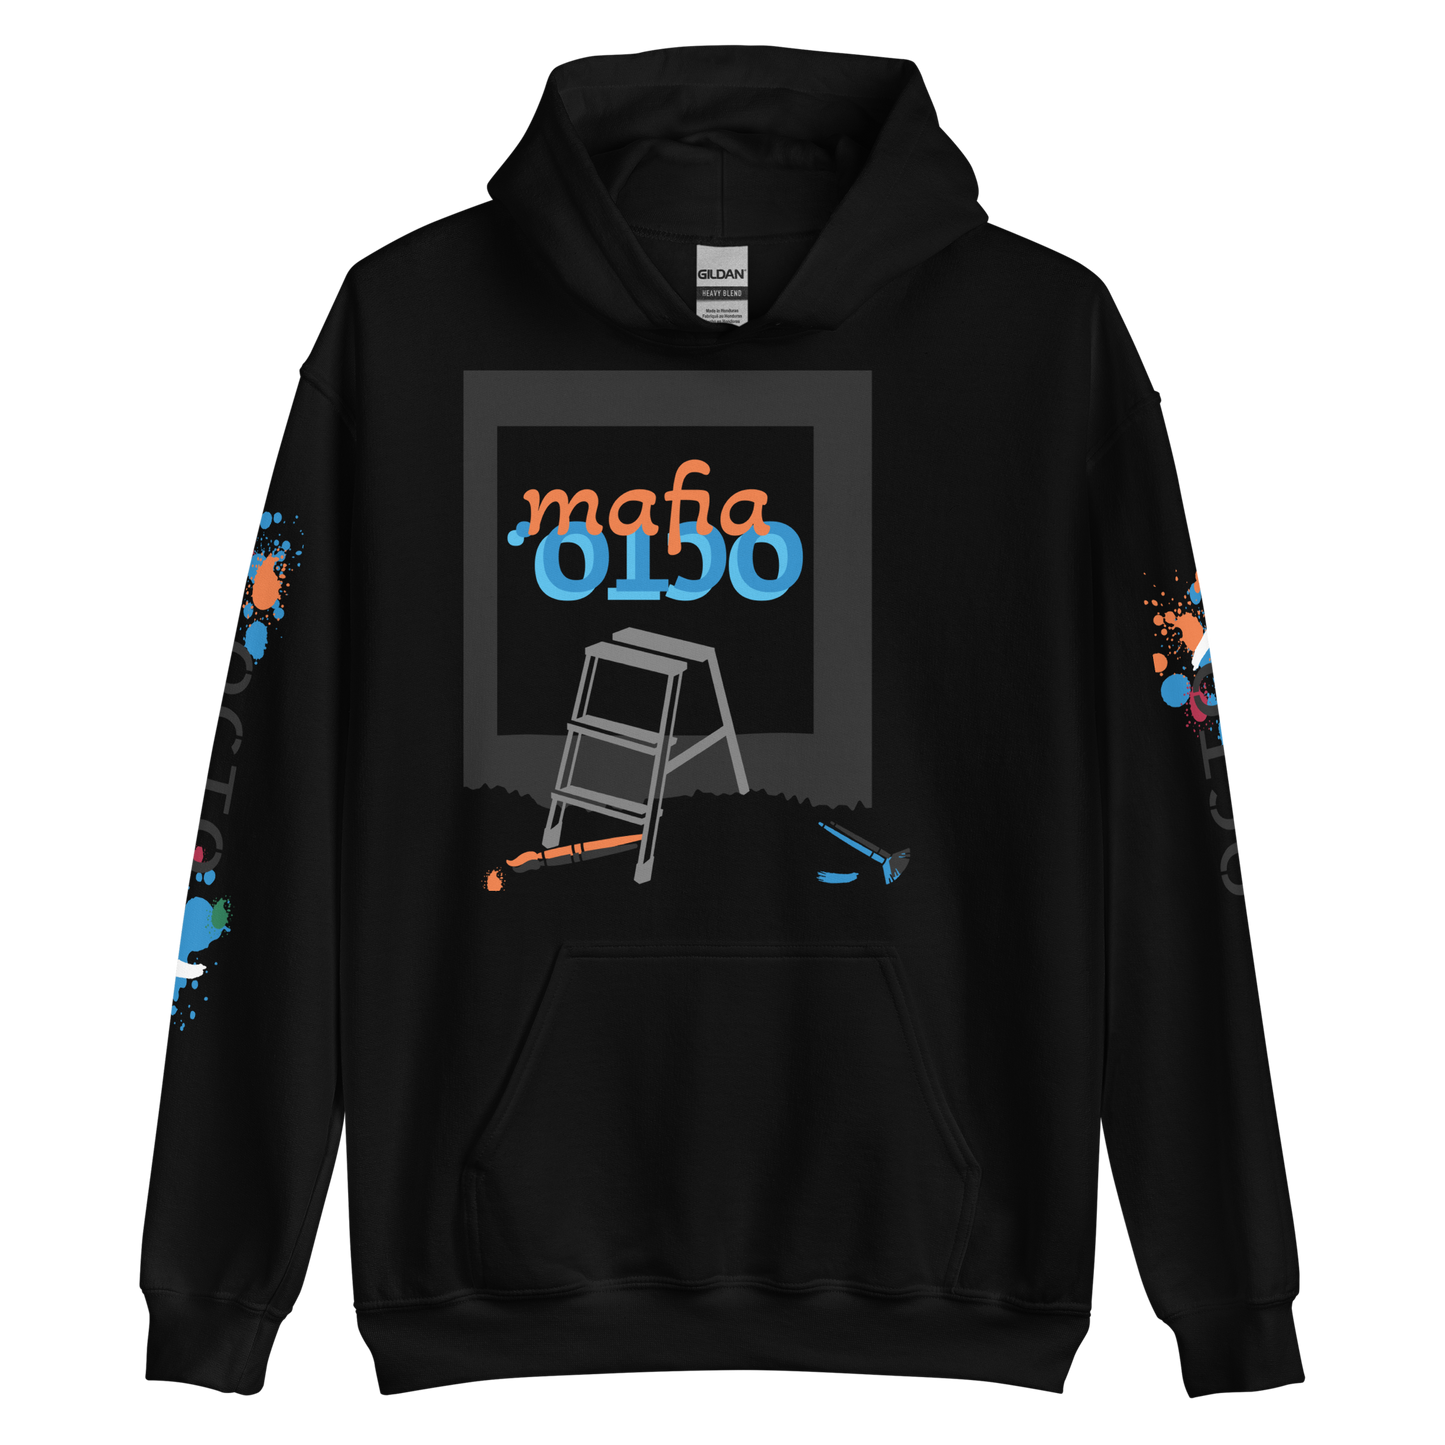 Octo. Mafia "canvas" hoodie (trapsuit top)